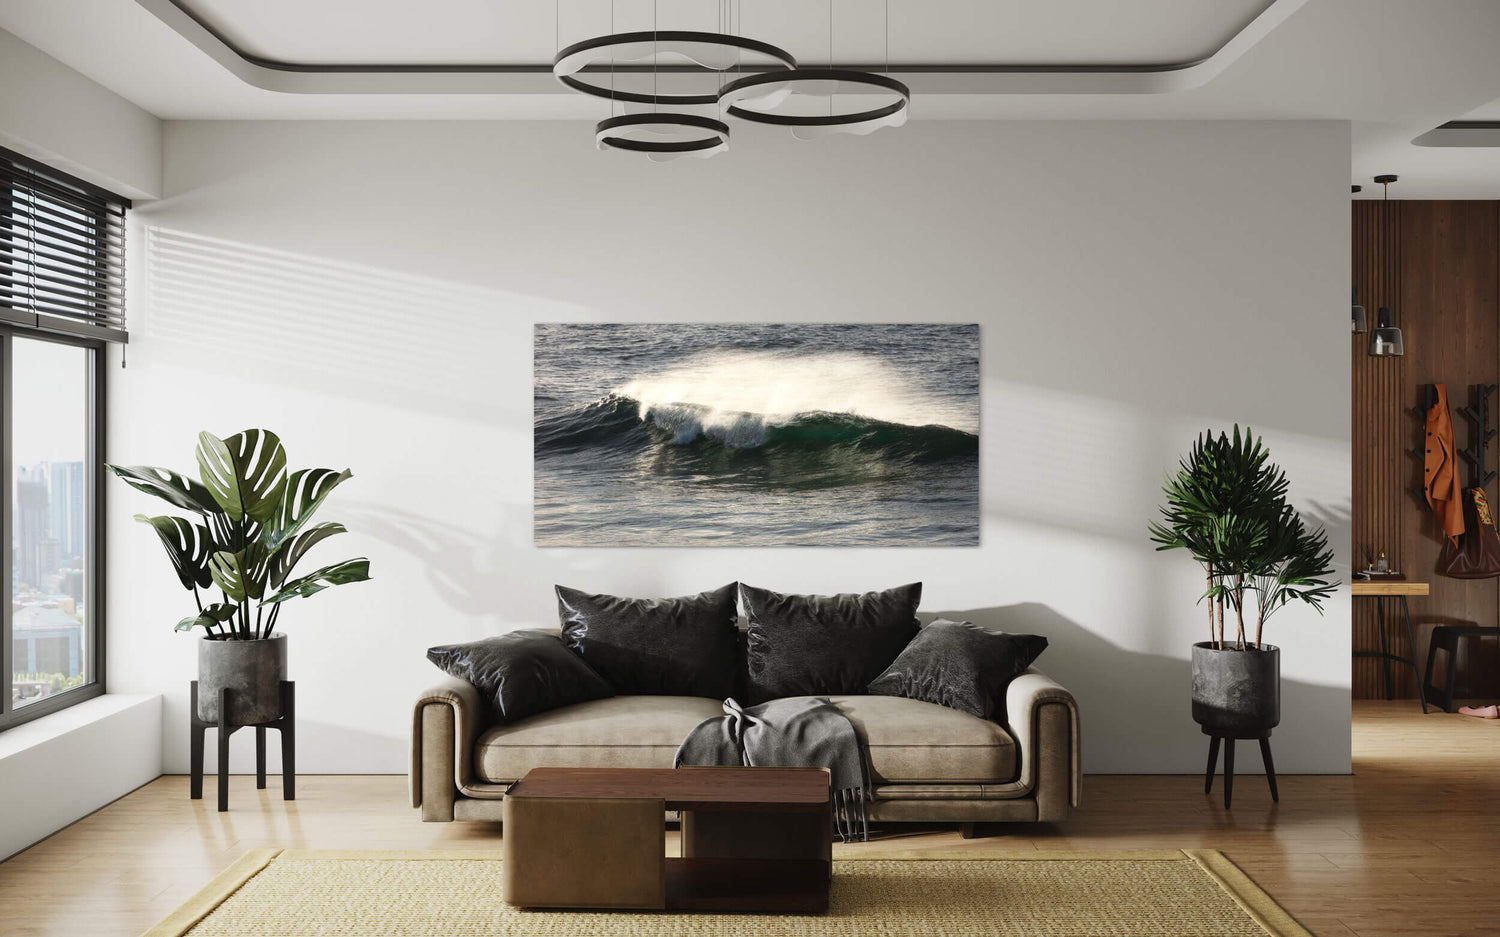 A wave picture from Shipwreck Beach in Poipu, Kauai hangs in a living room.